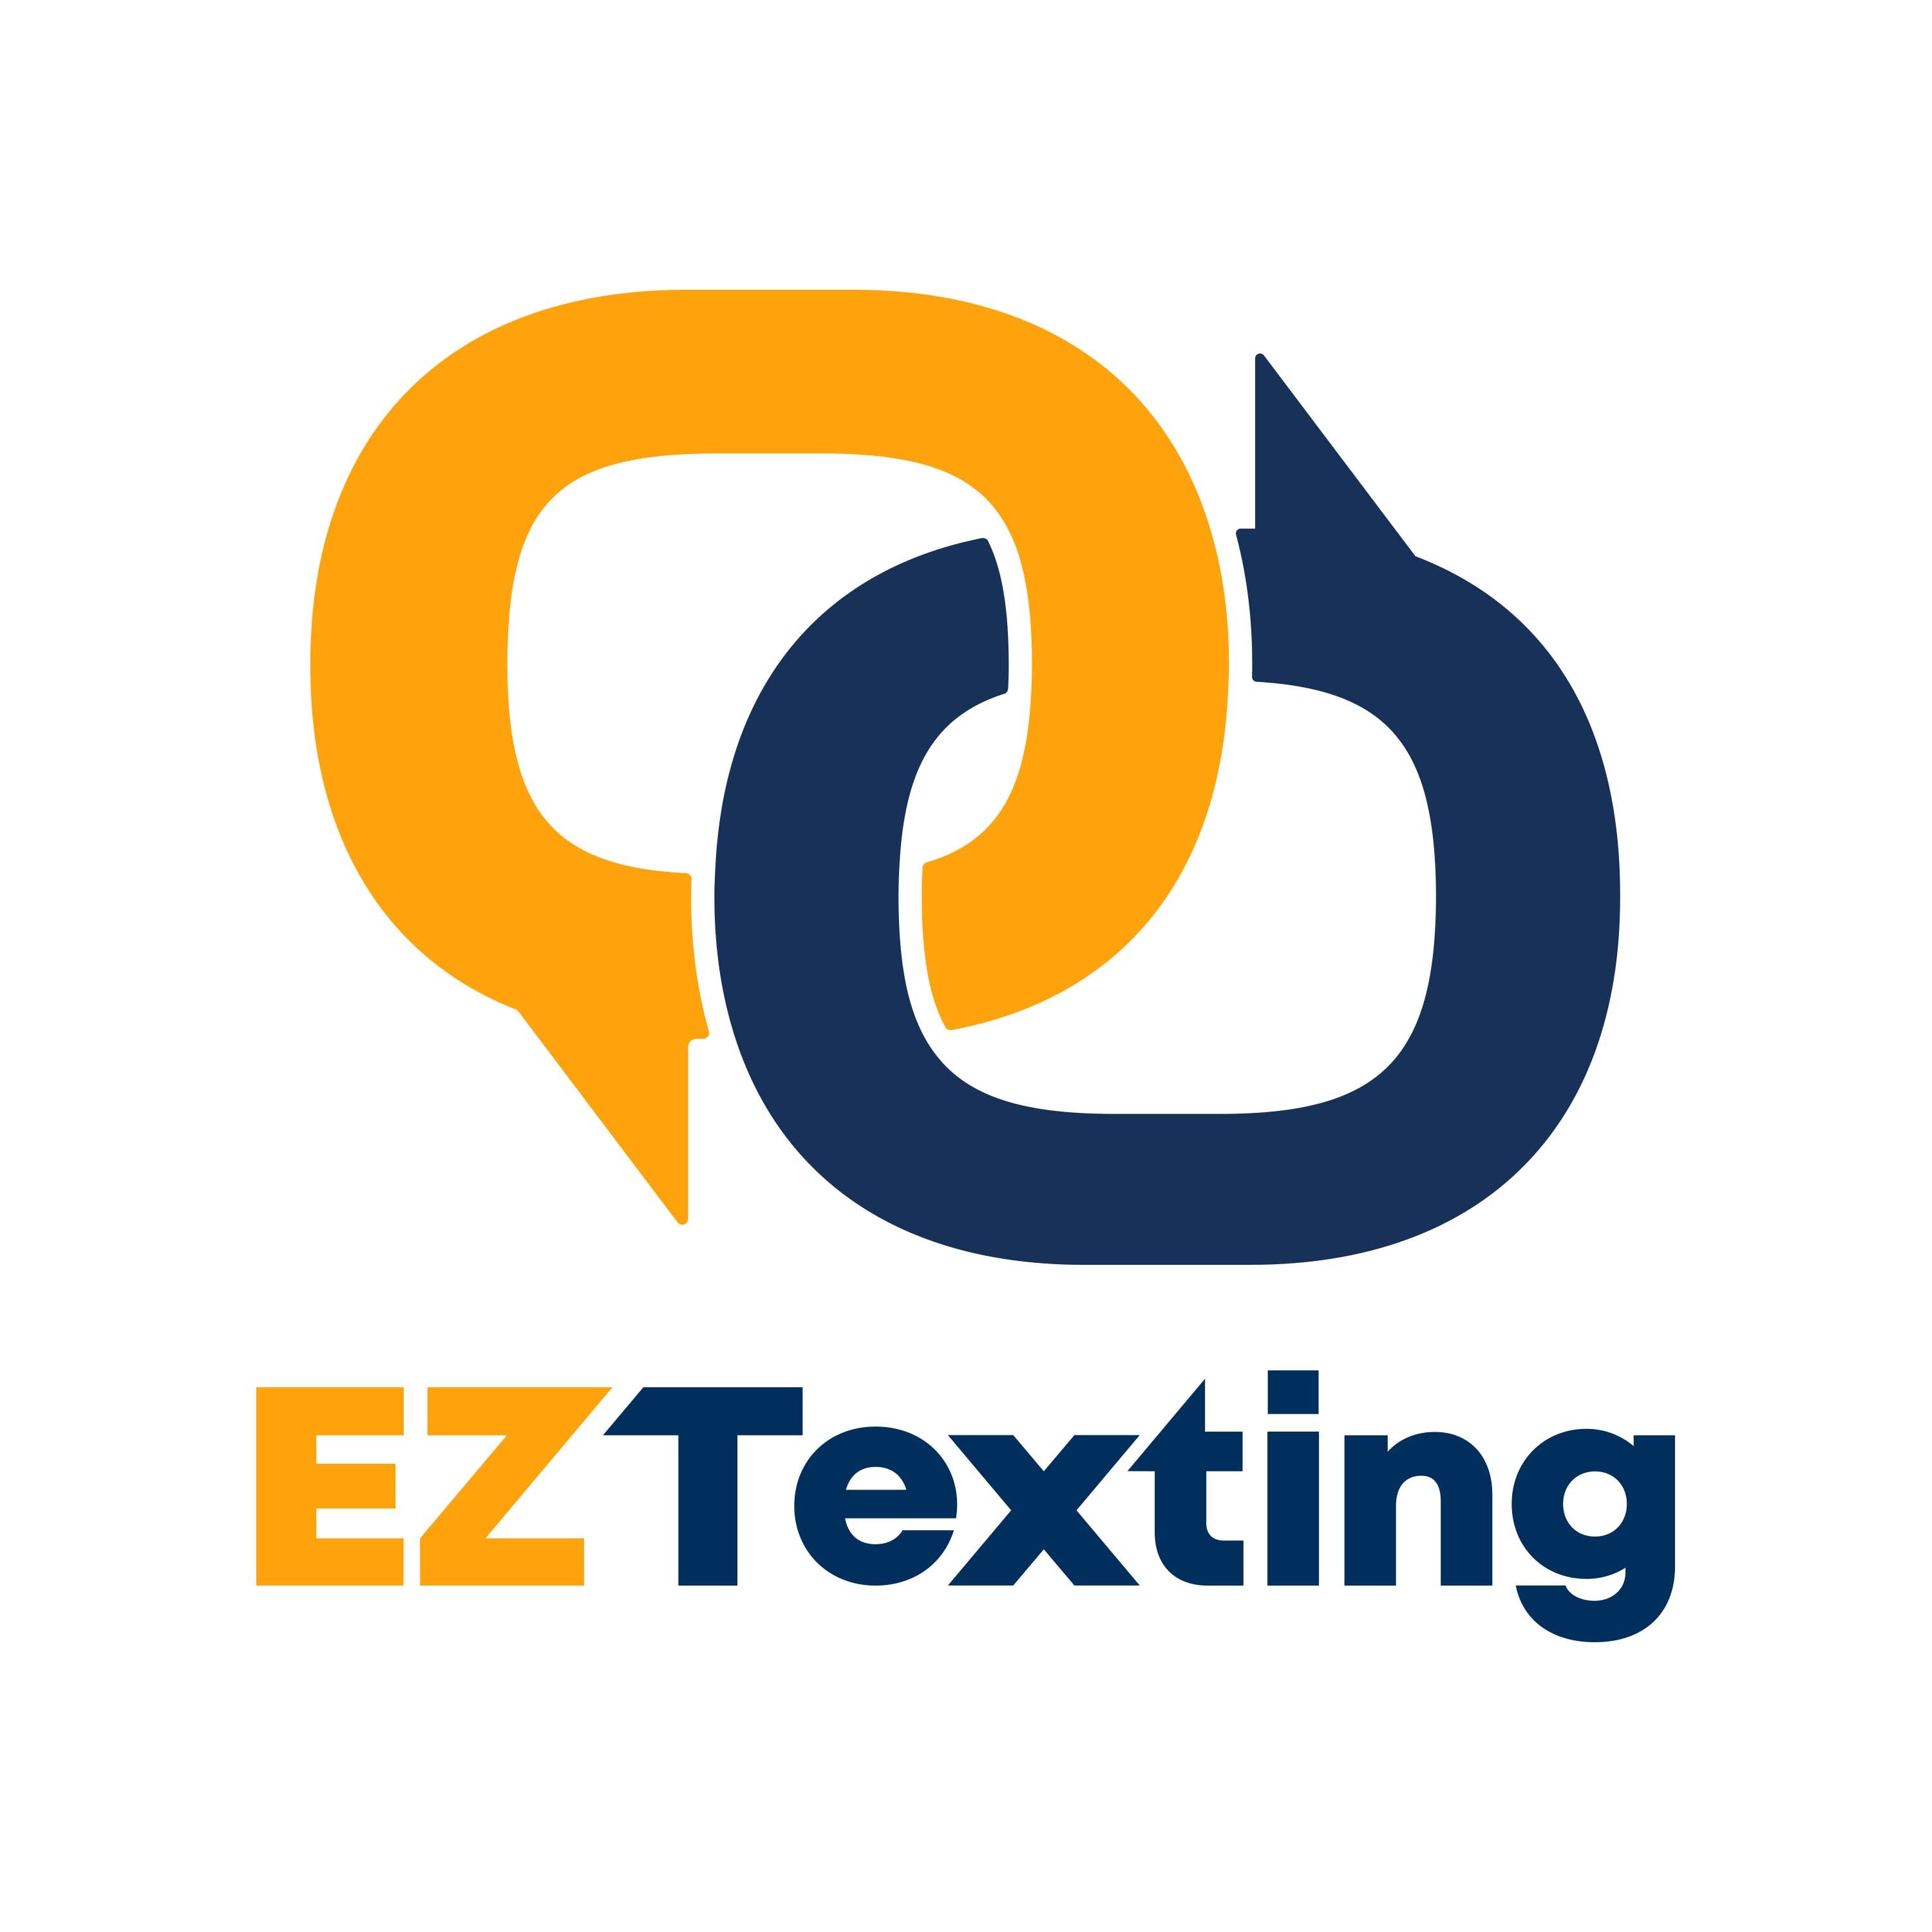 EZTexting_logo_full_color-stacked